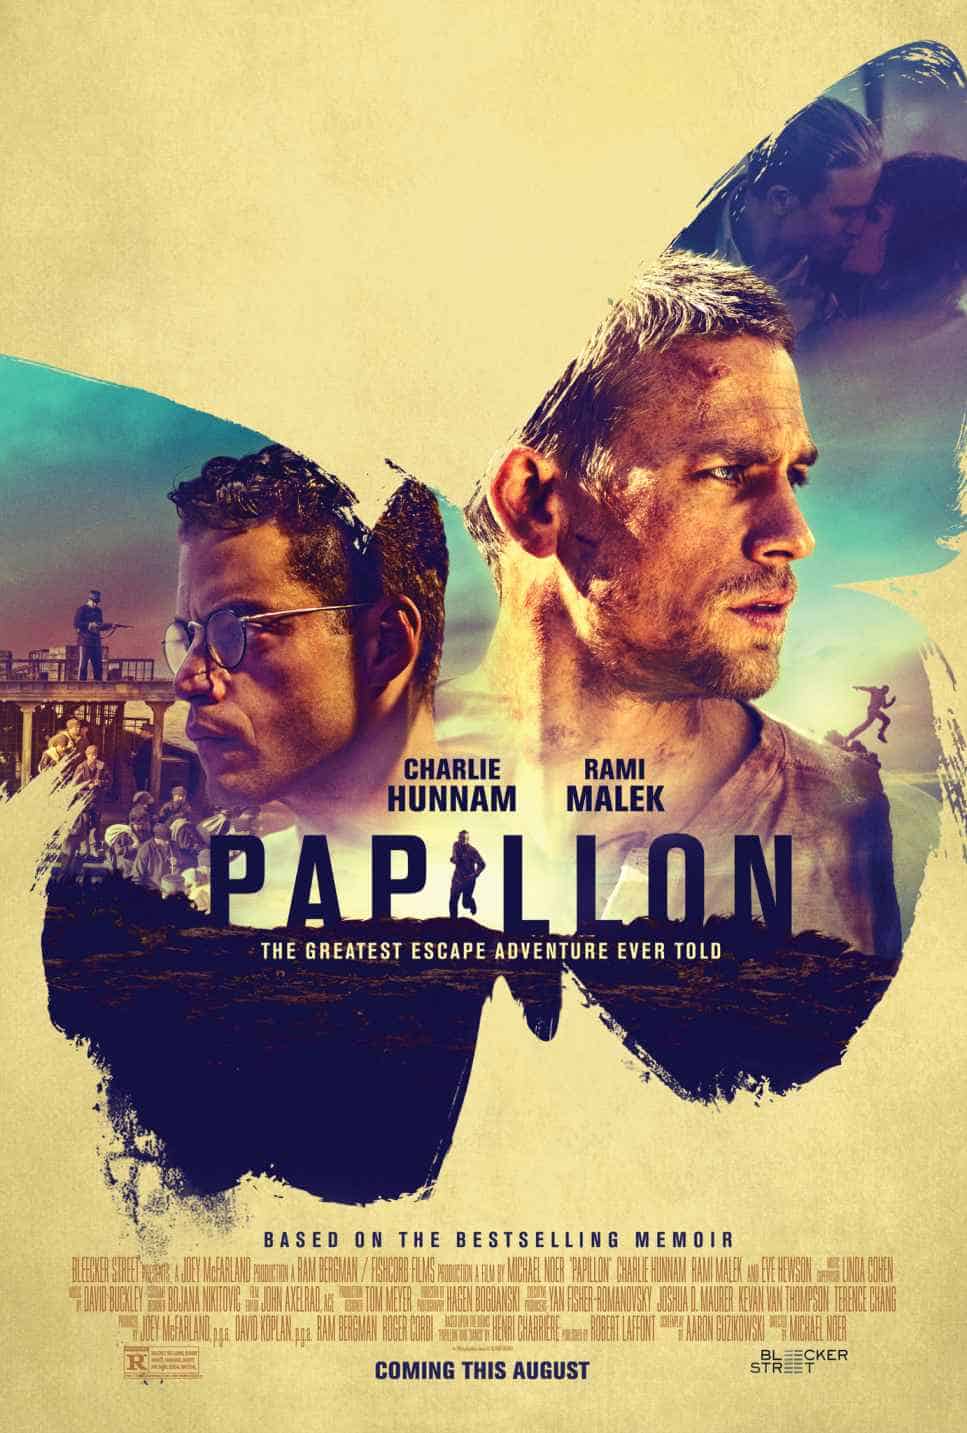 Best Prison Movies You Can't Miss Papillon (2017)